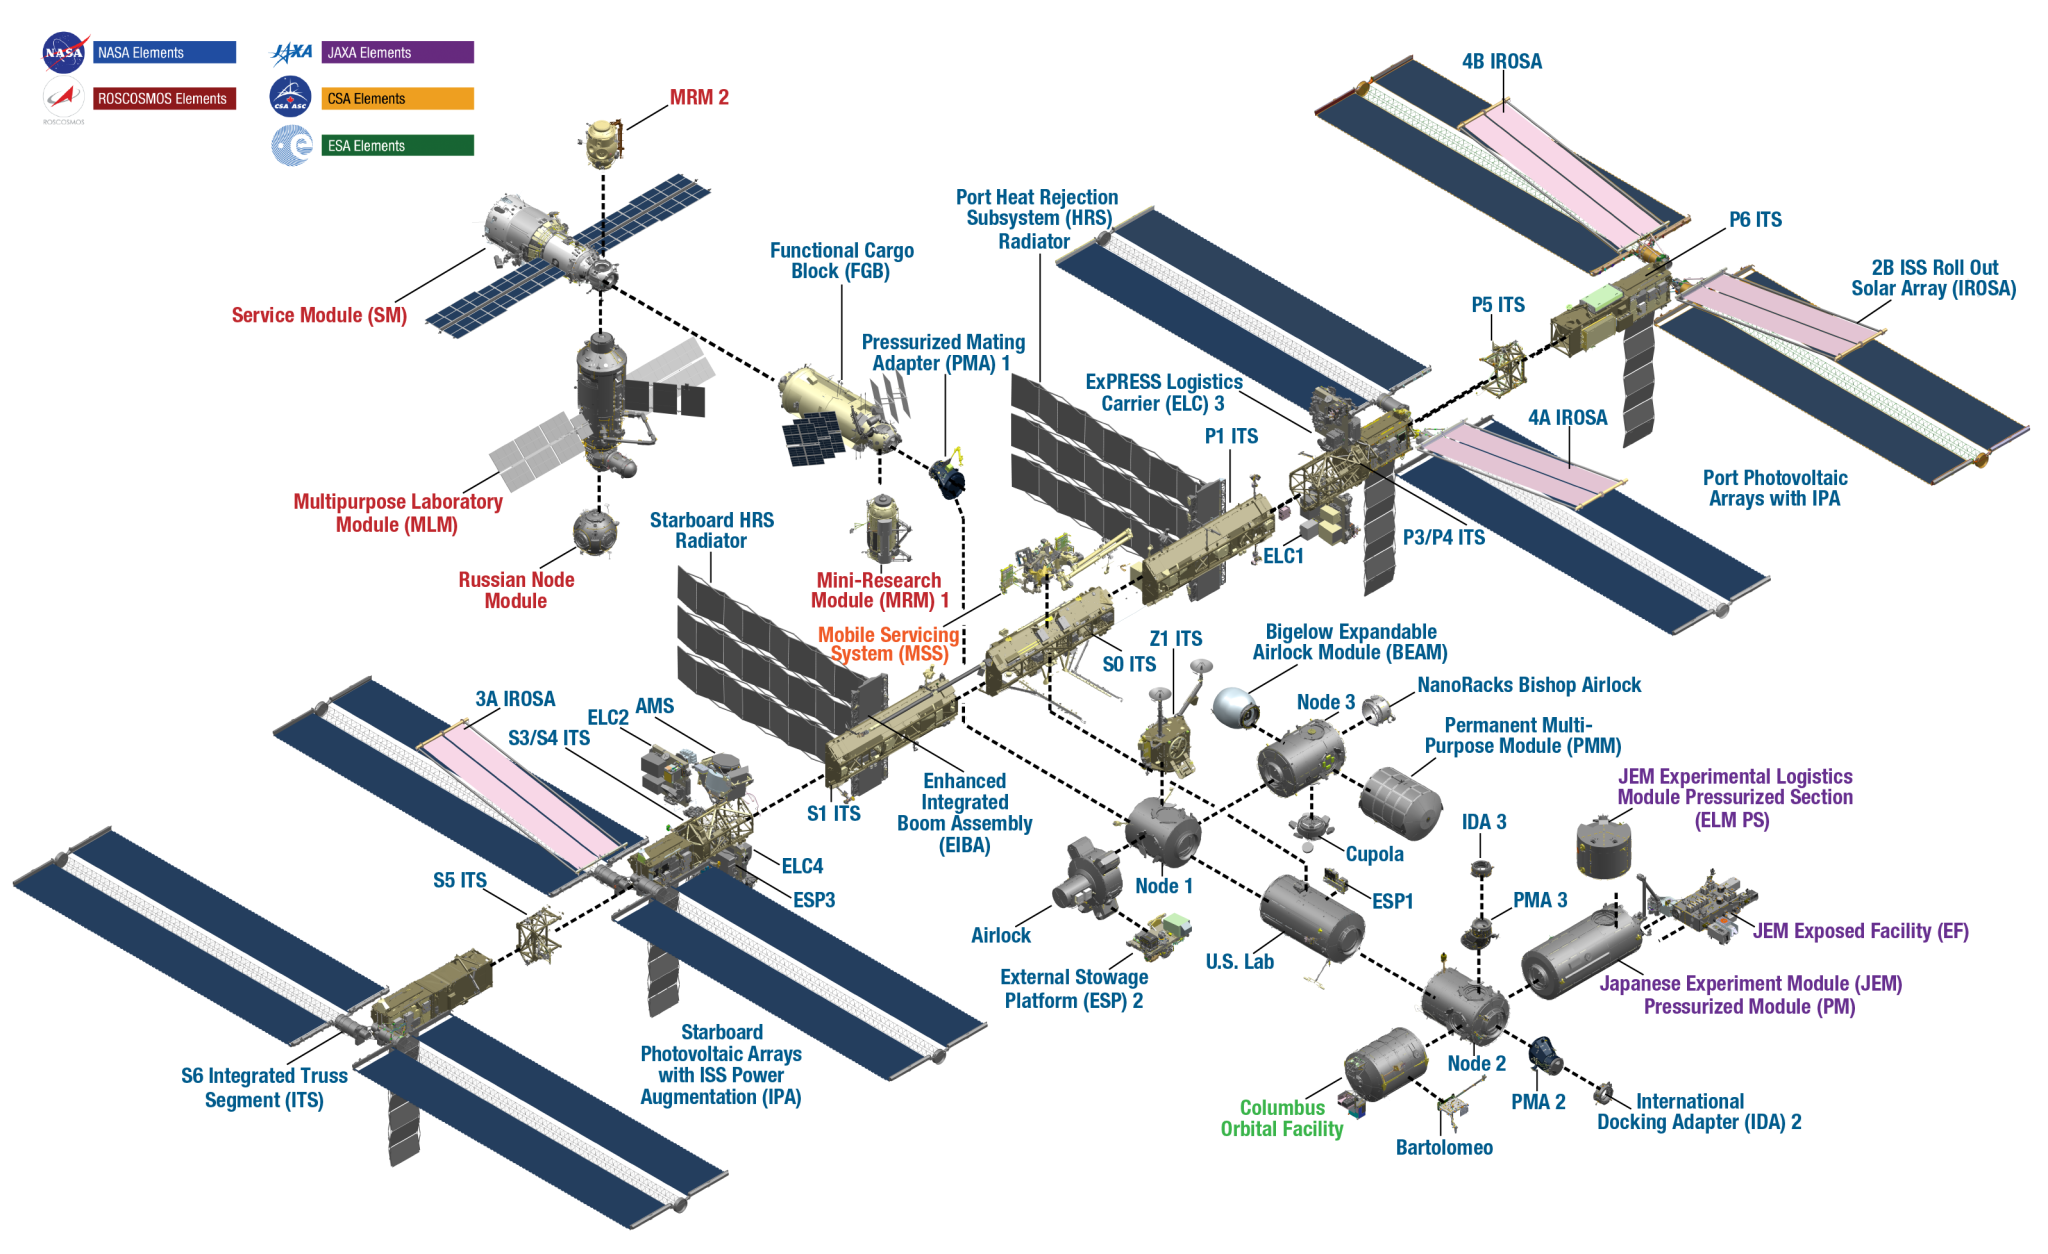 Drawing of the International Space Station with all of the parts labeled.